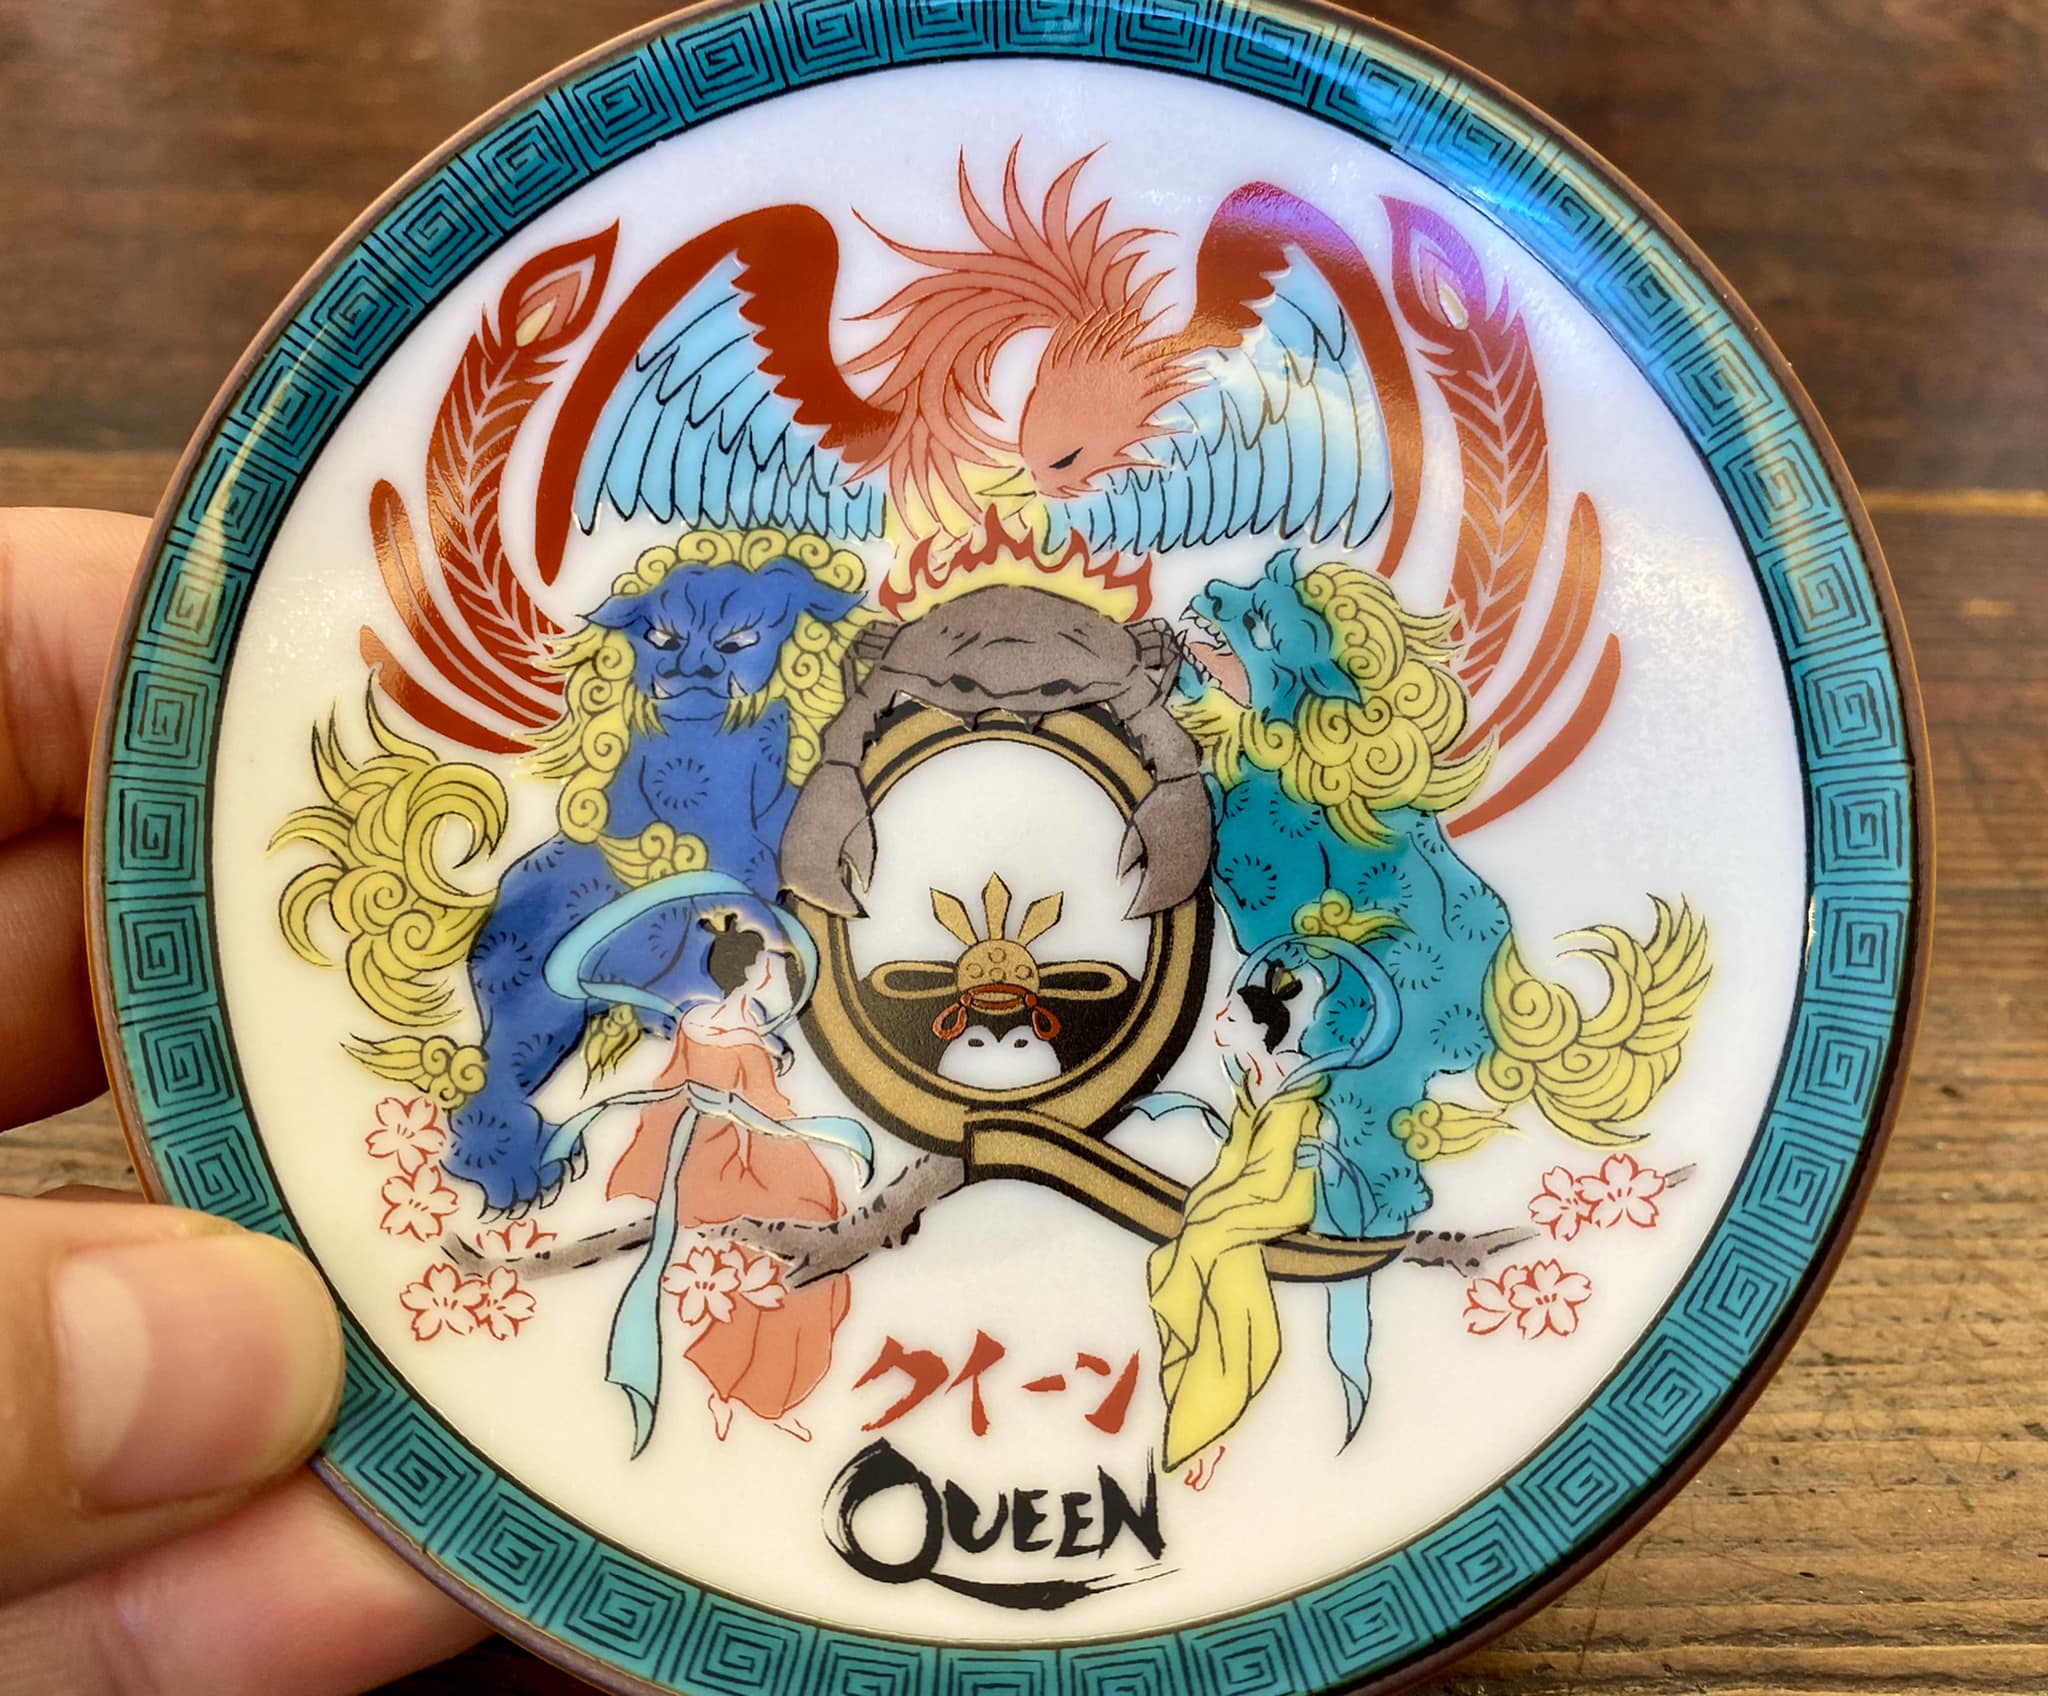 Queen展で購入した九谷焼